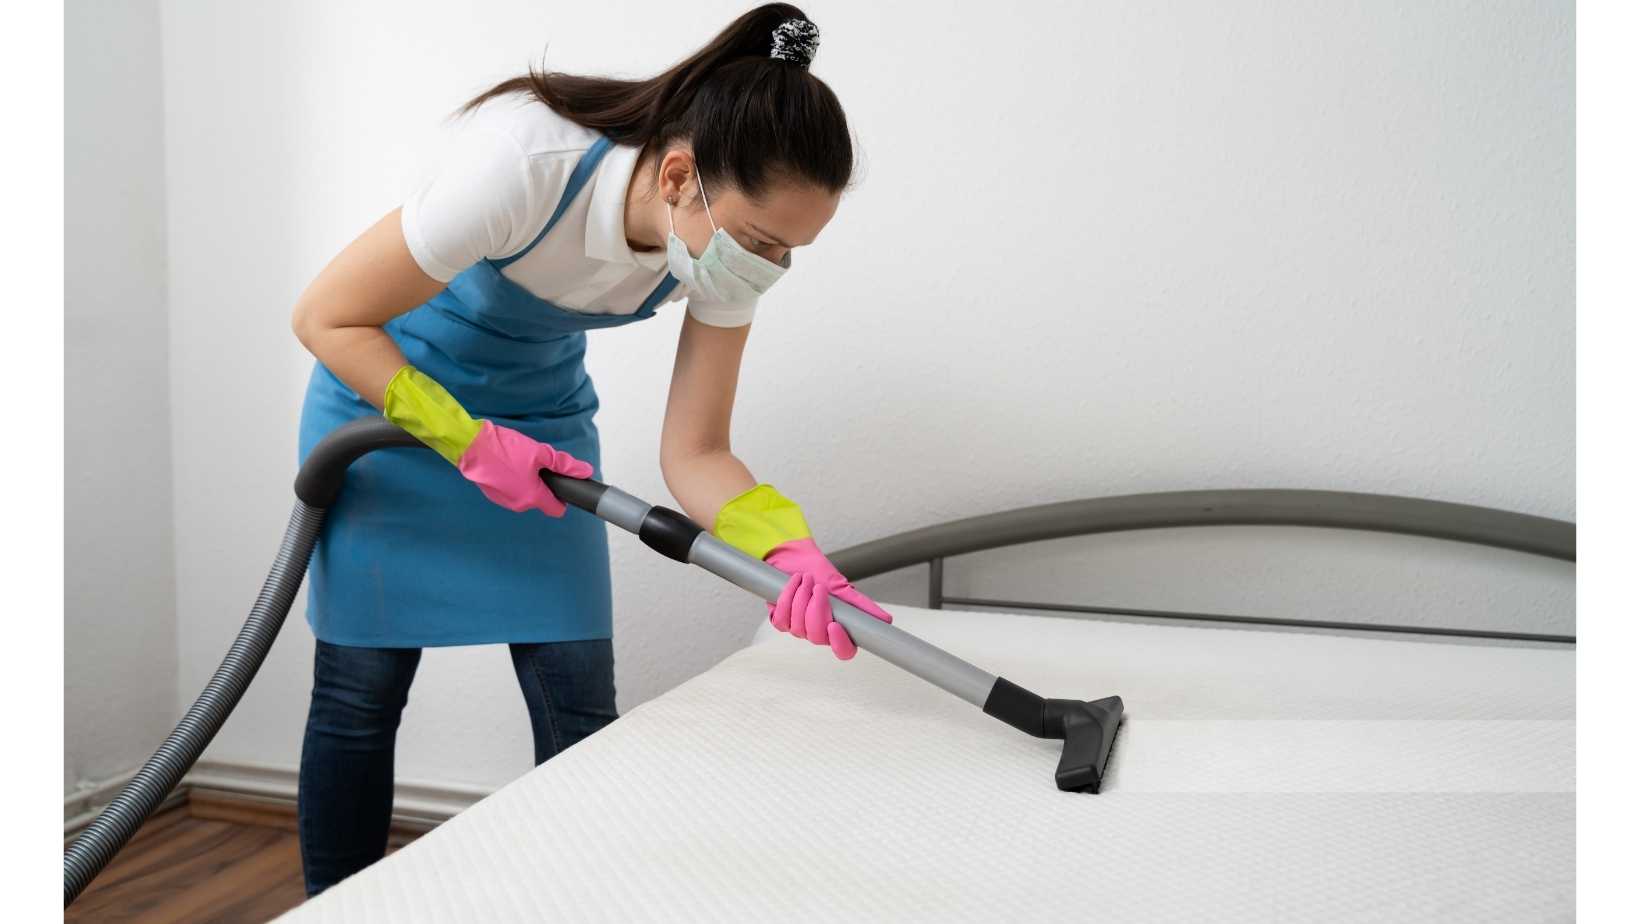 How To Clean A Mattress With Baking Soda and Vinegar